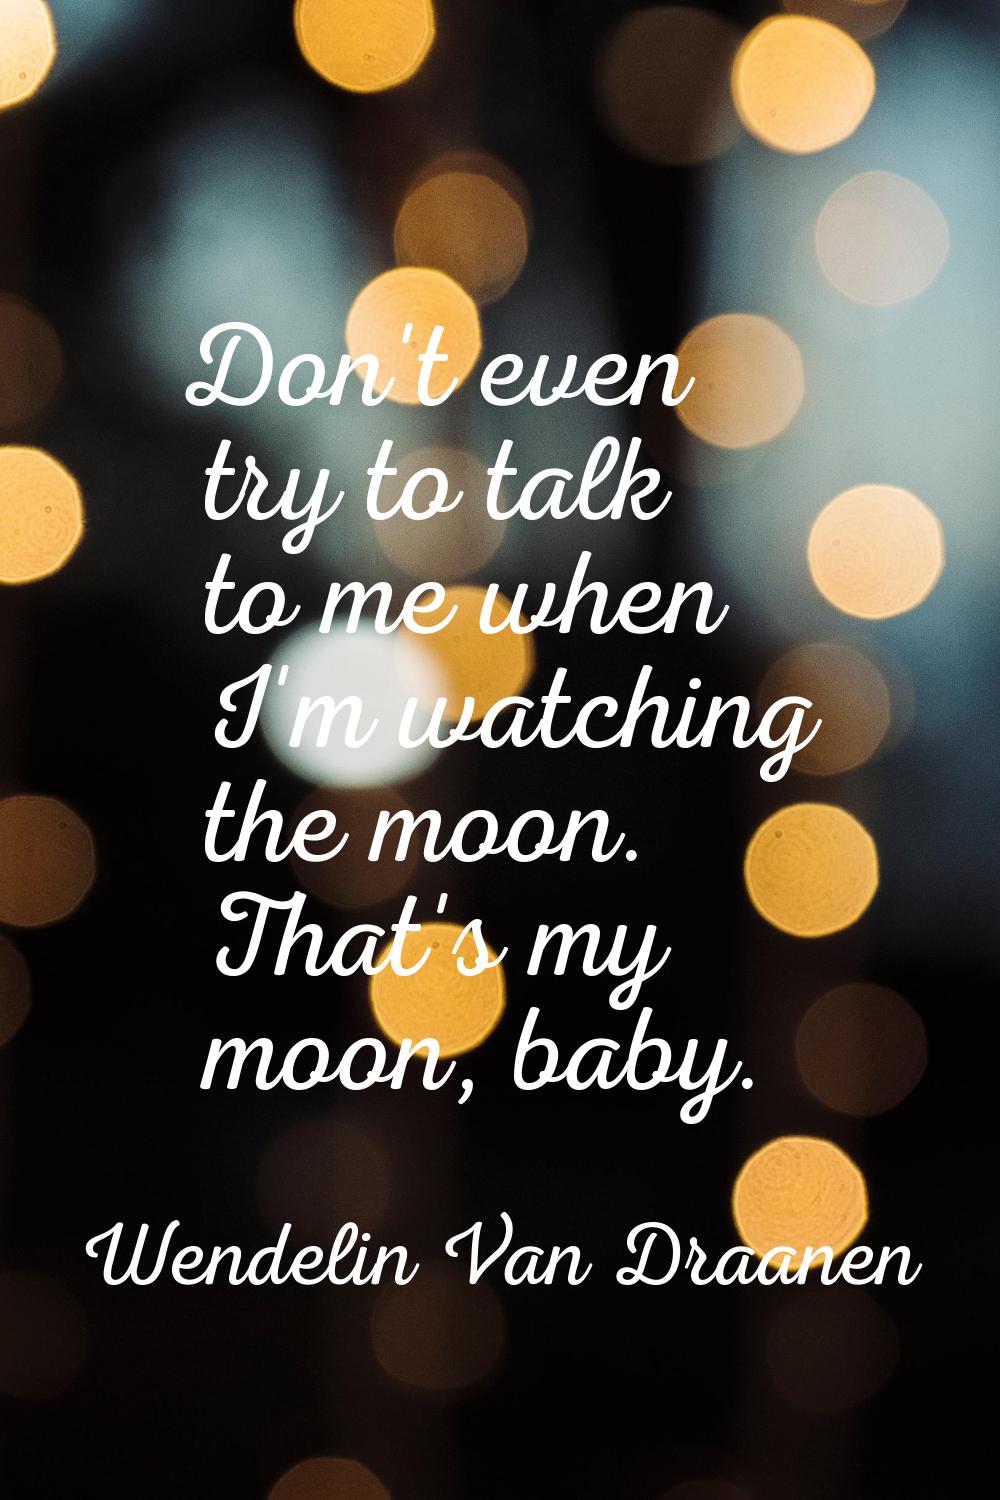 Don't even try to talk to me when I'm watching the moon. That's my moon, baby.